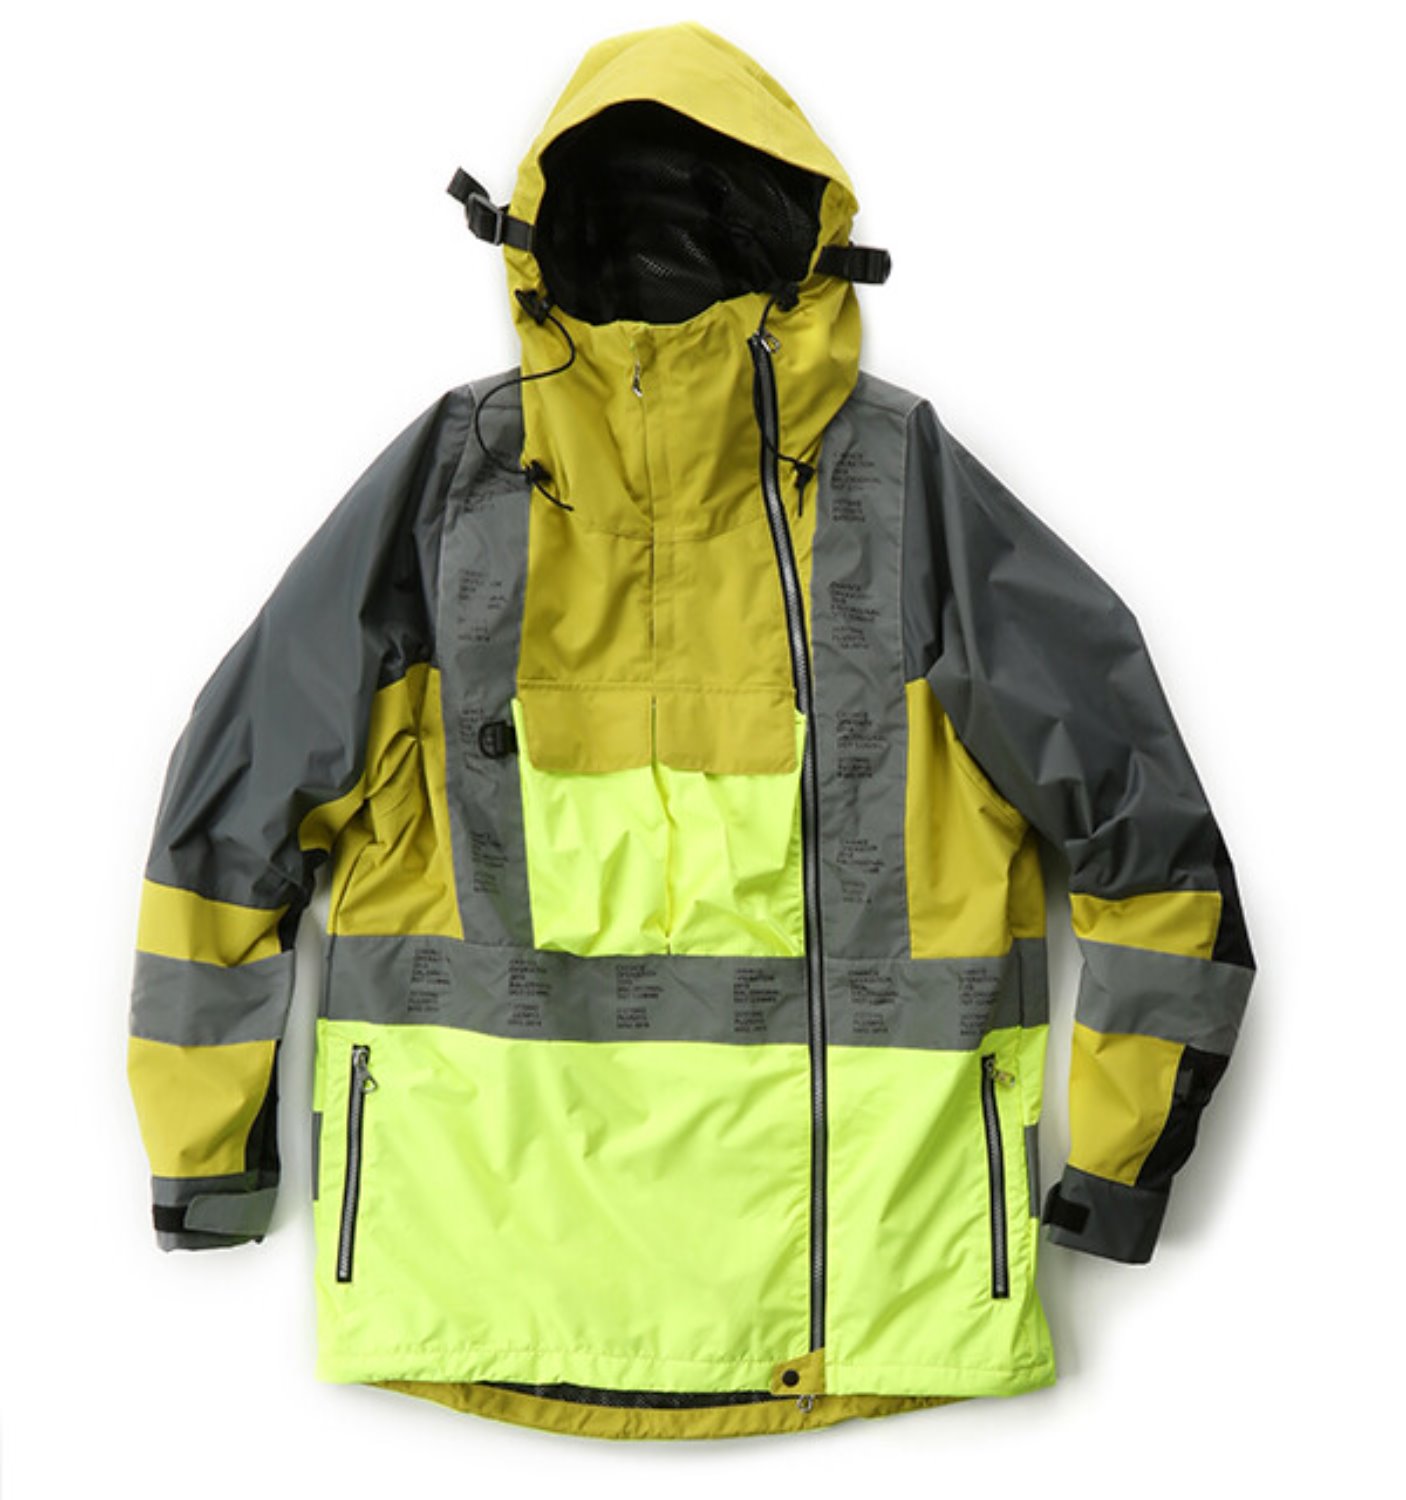 3M TAPED WATER PROOF JACKET LIME